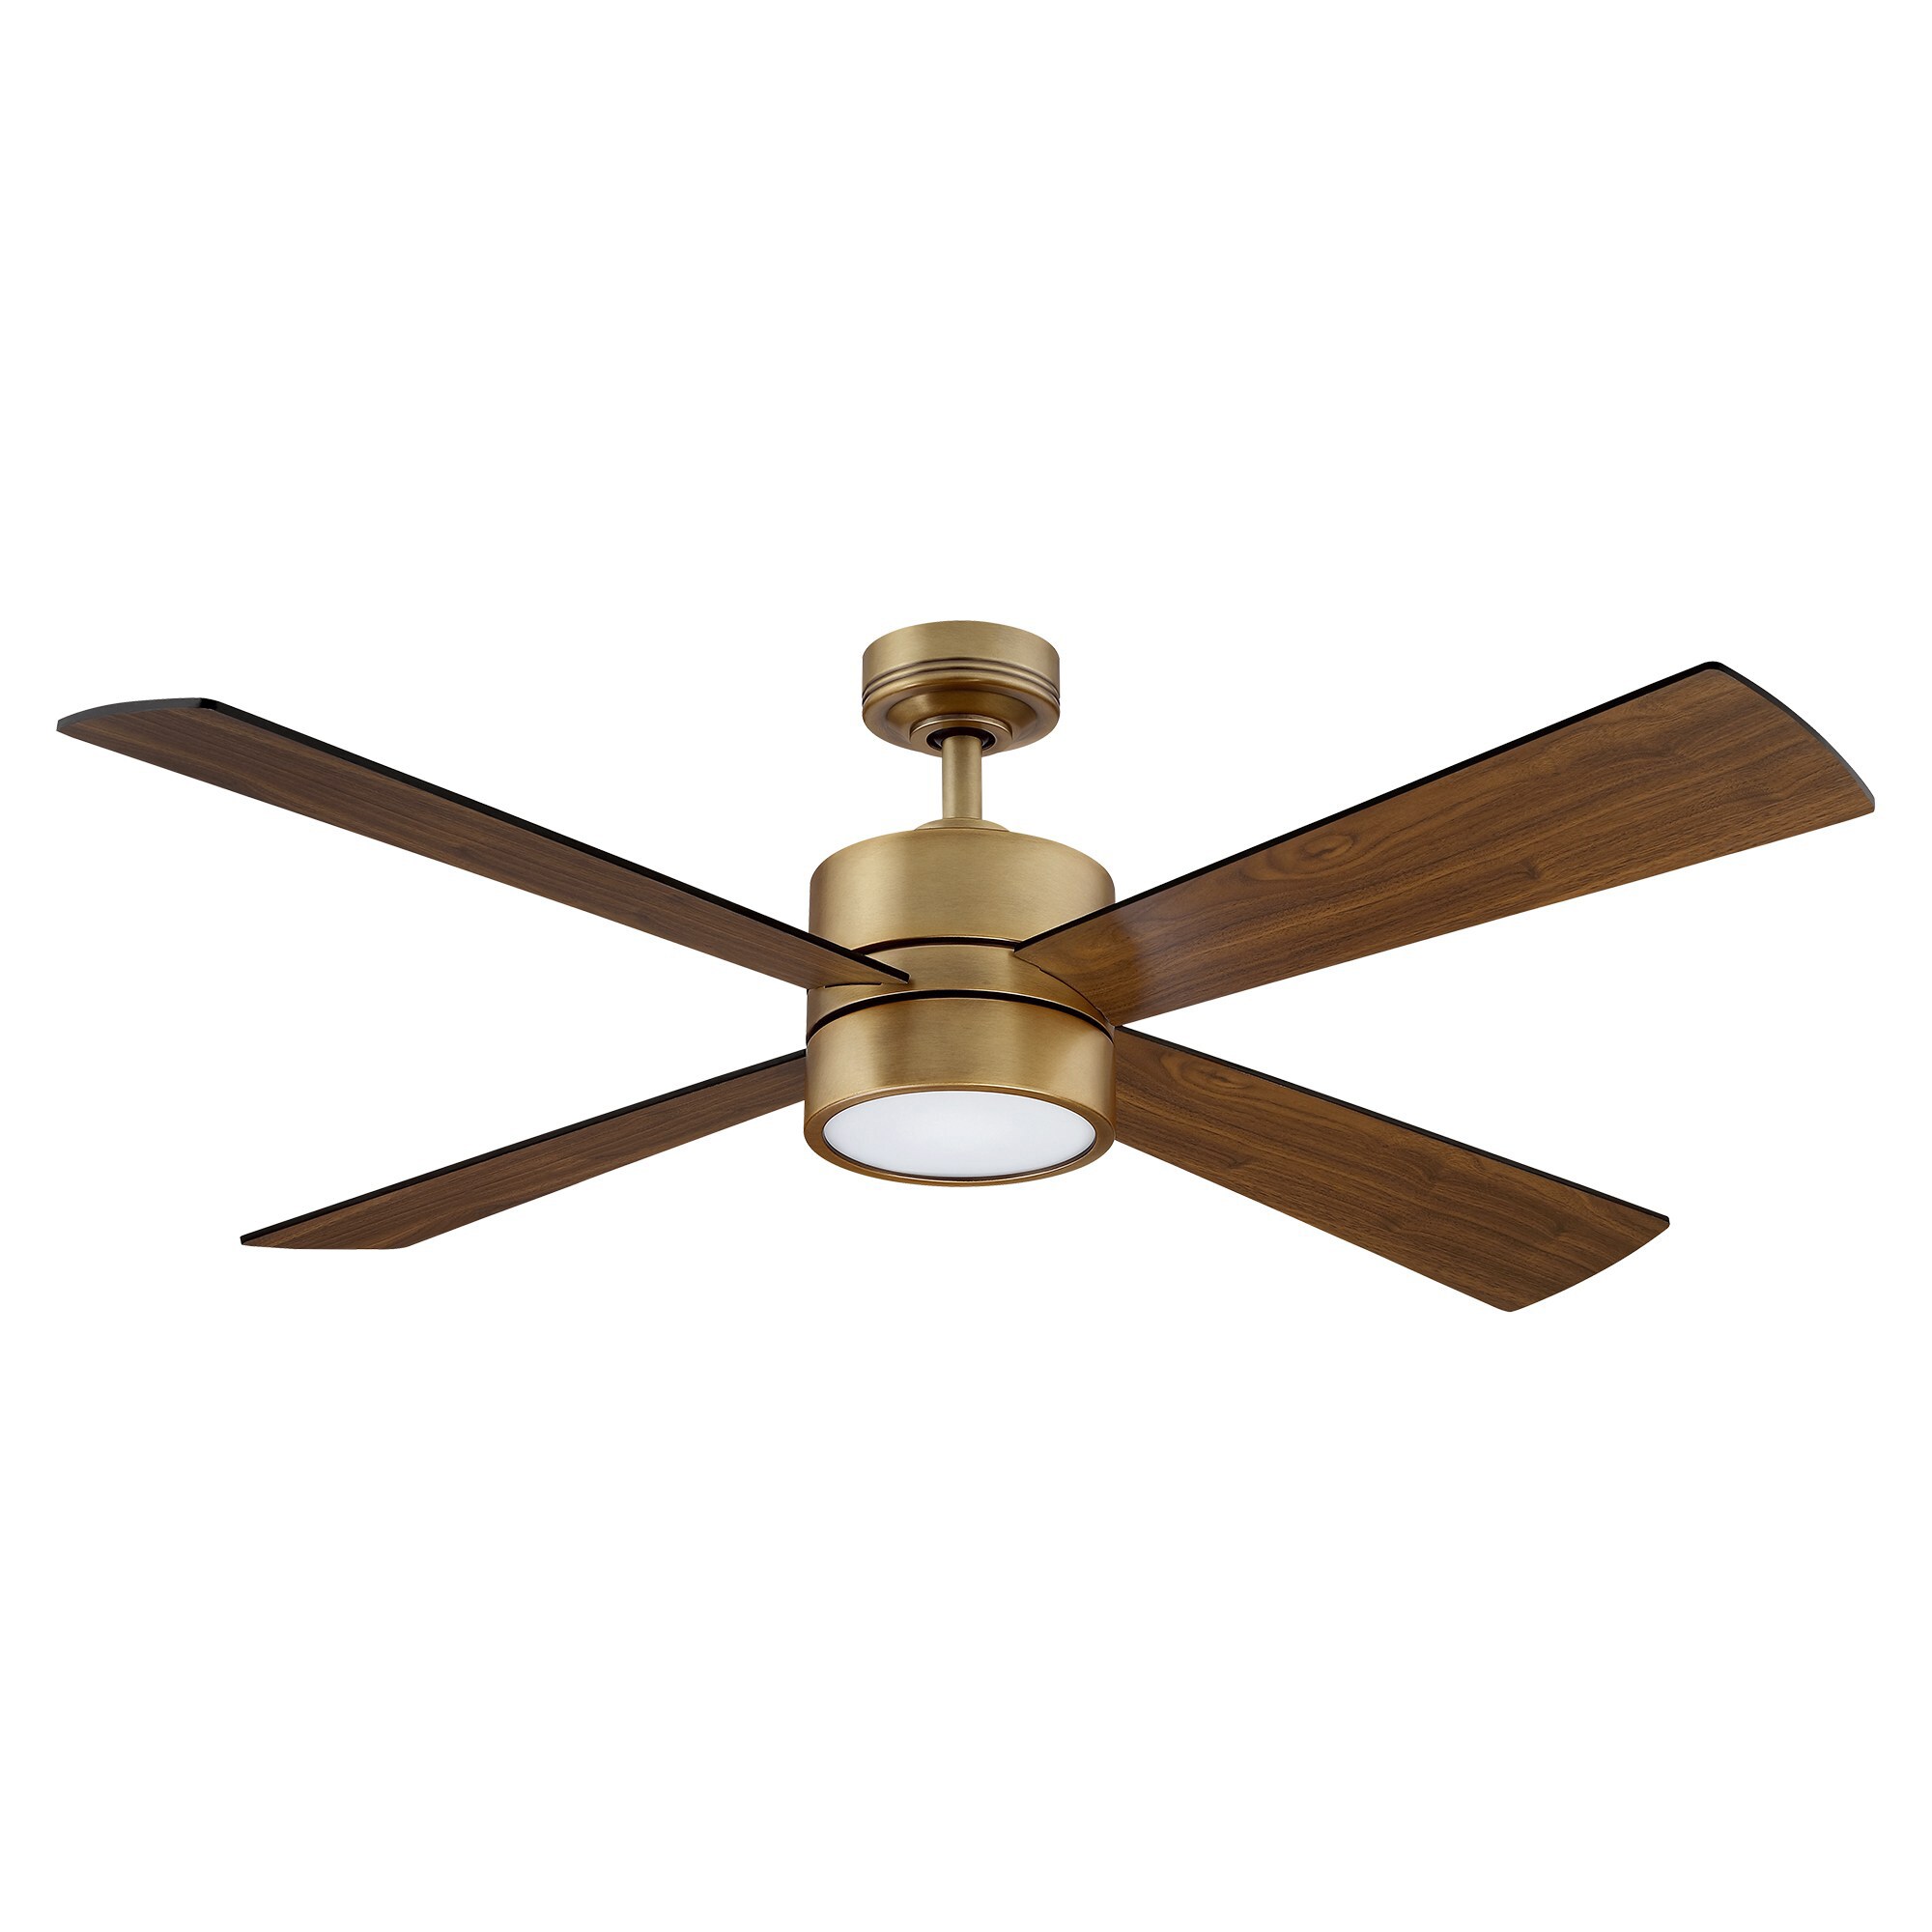 Parrot Uncle Wall Mount Fans 10 Inch Indoor Ceiling Fan with Plug in Cord  Wall-mounted Fan with Folding Arm, AC Motor, Walnut Color